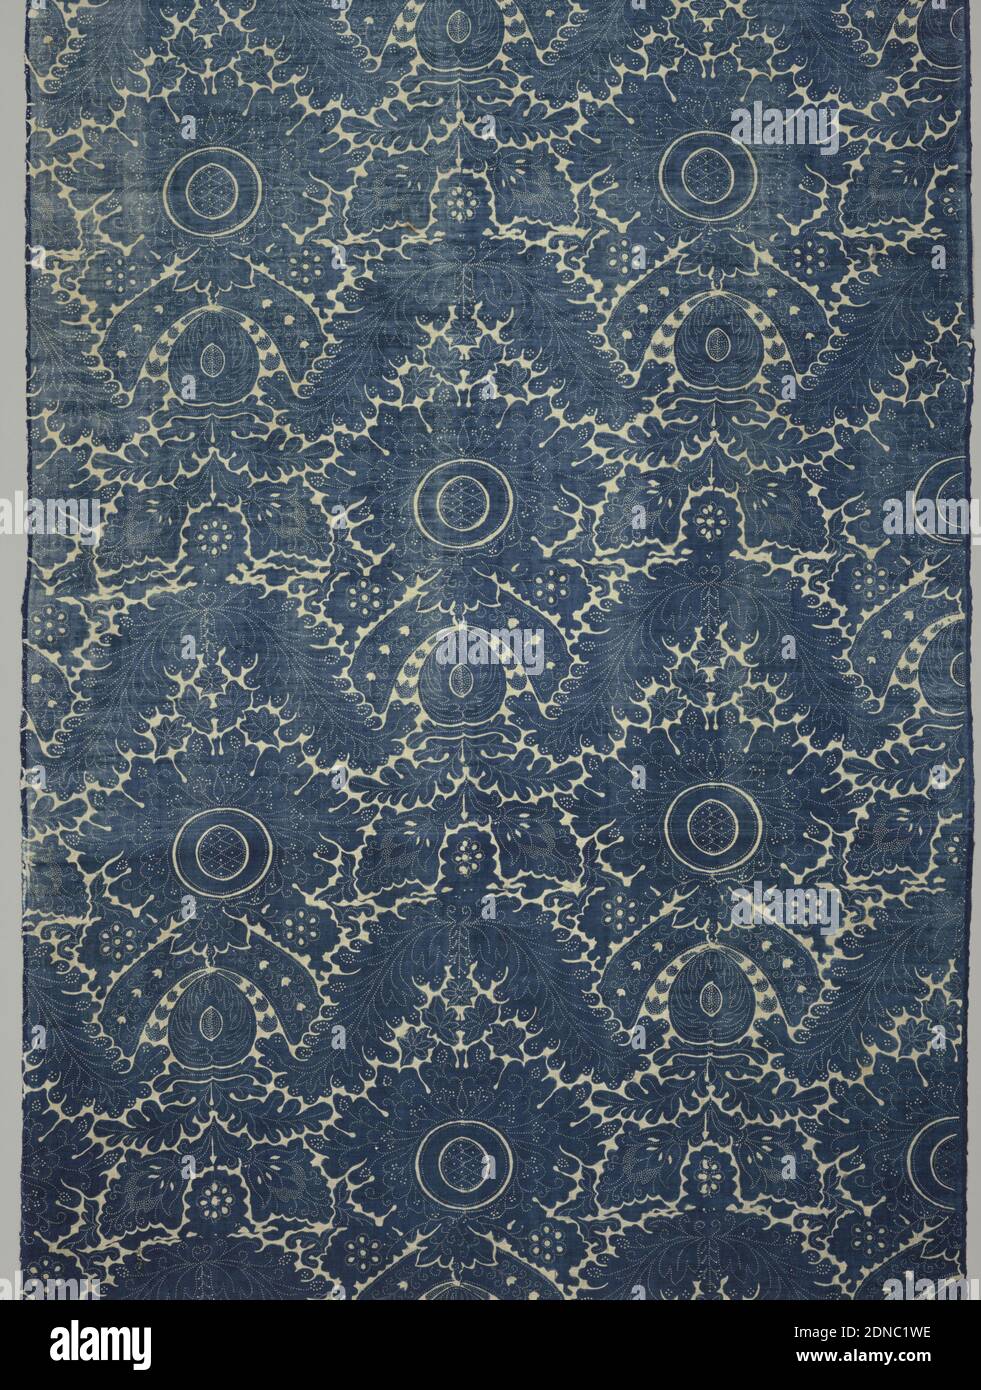 Textile, Medium: cotton Technique: block printed using resist, then vat dyed in indigo on plain weave, Pomegranate-like shapes within a frame of arching leaves. Two repeats across width. In blue on white., France, 1750–1800, printed, dyed & painted textiles, Textile Stock Photo